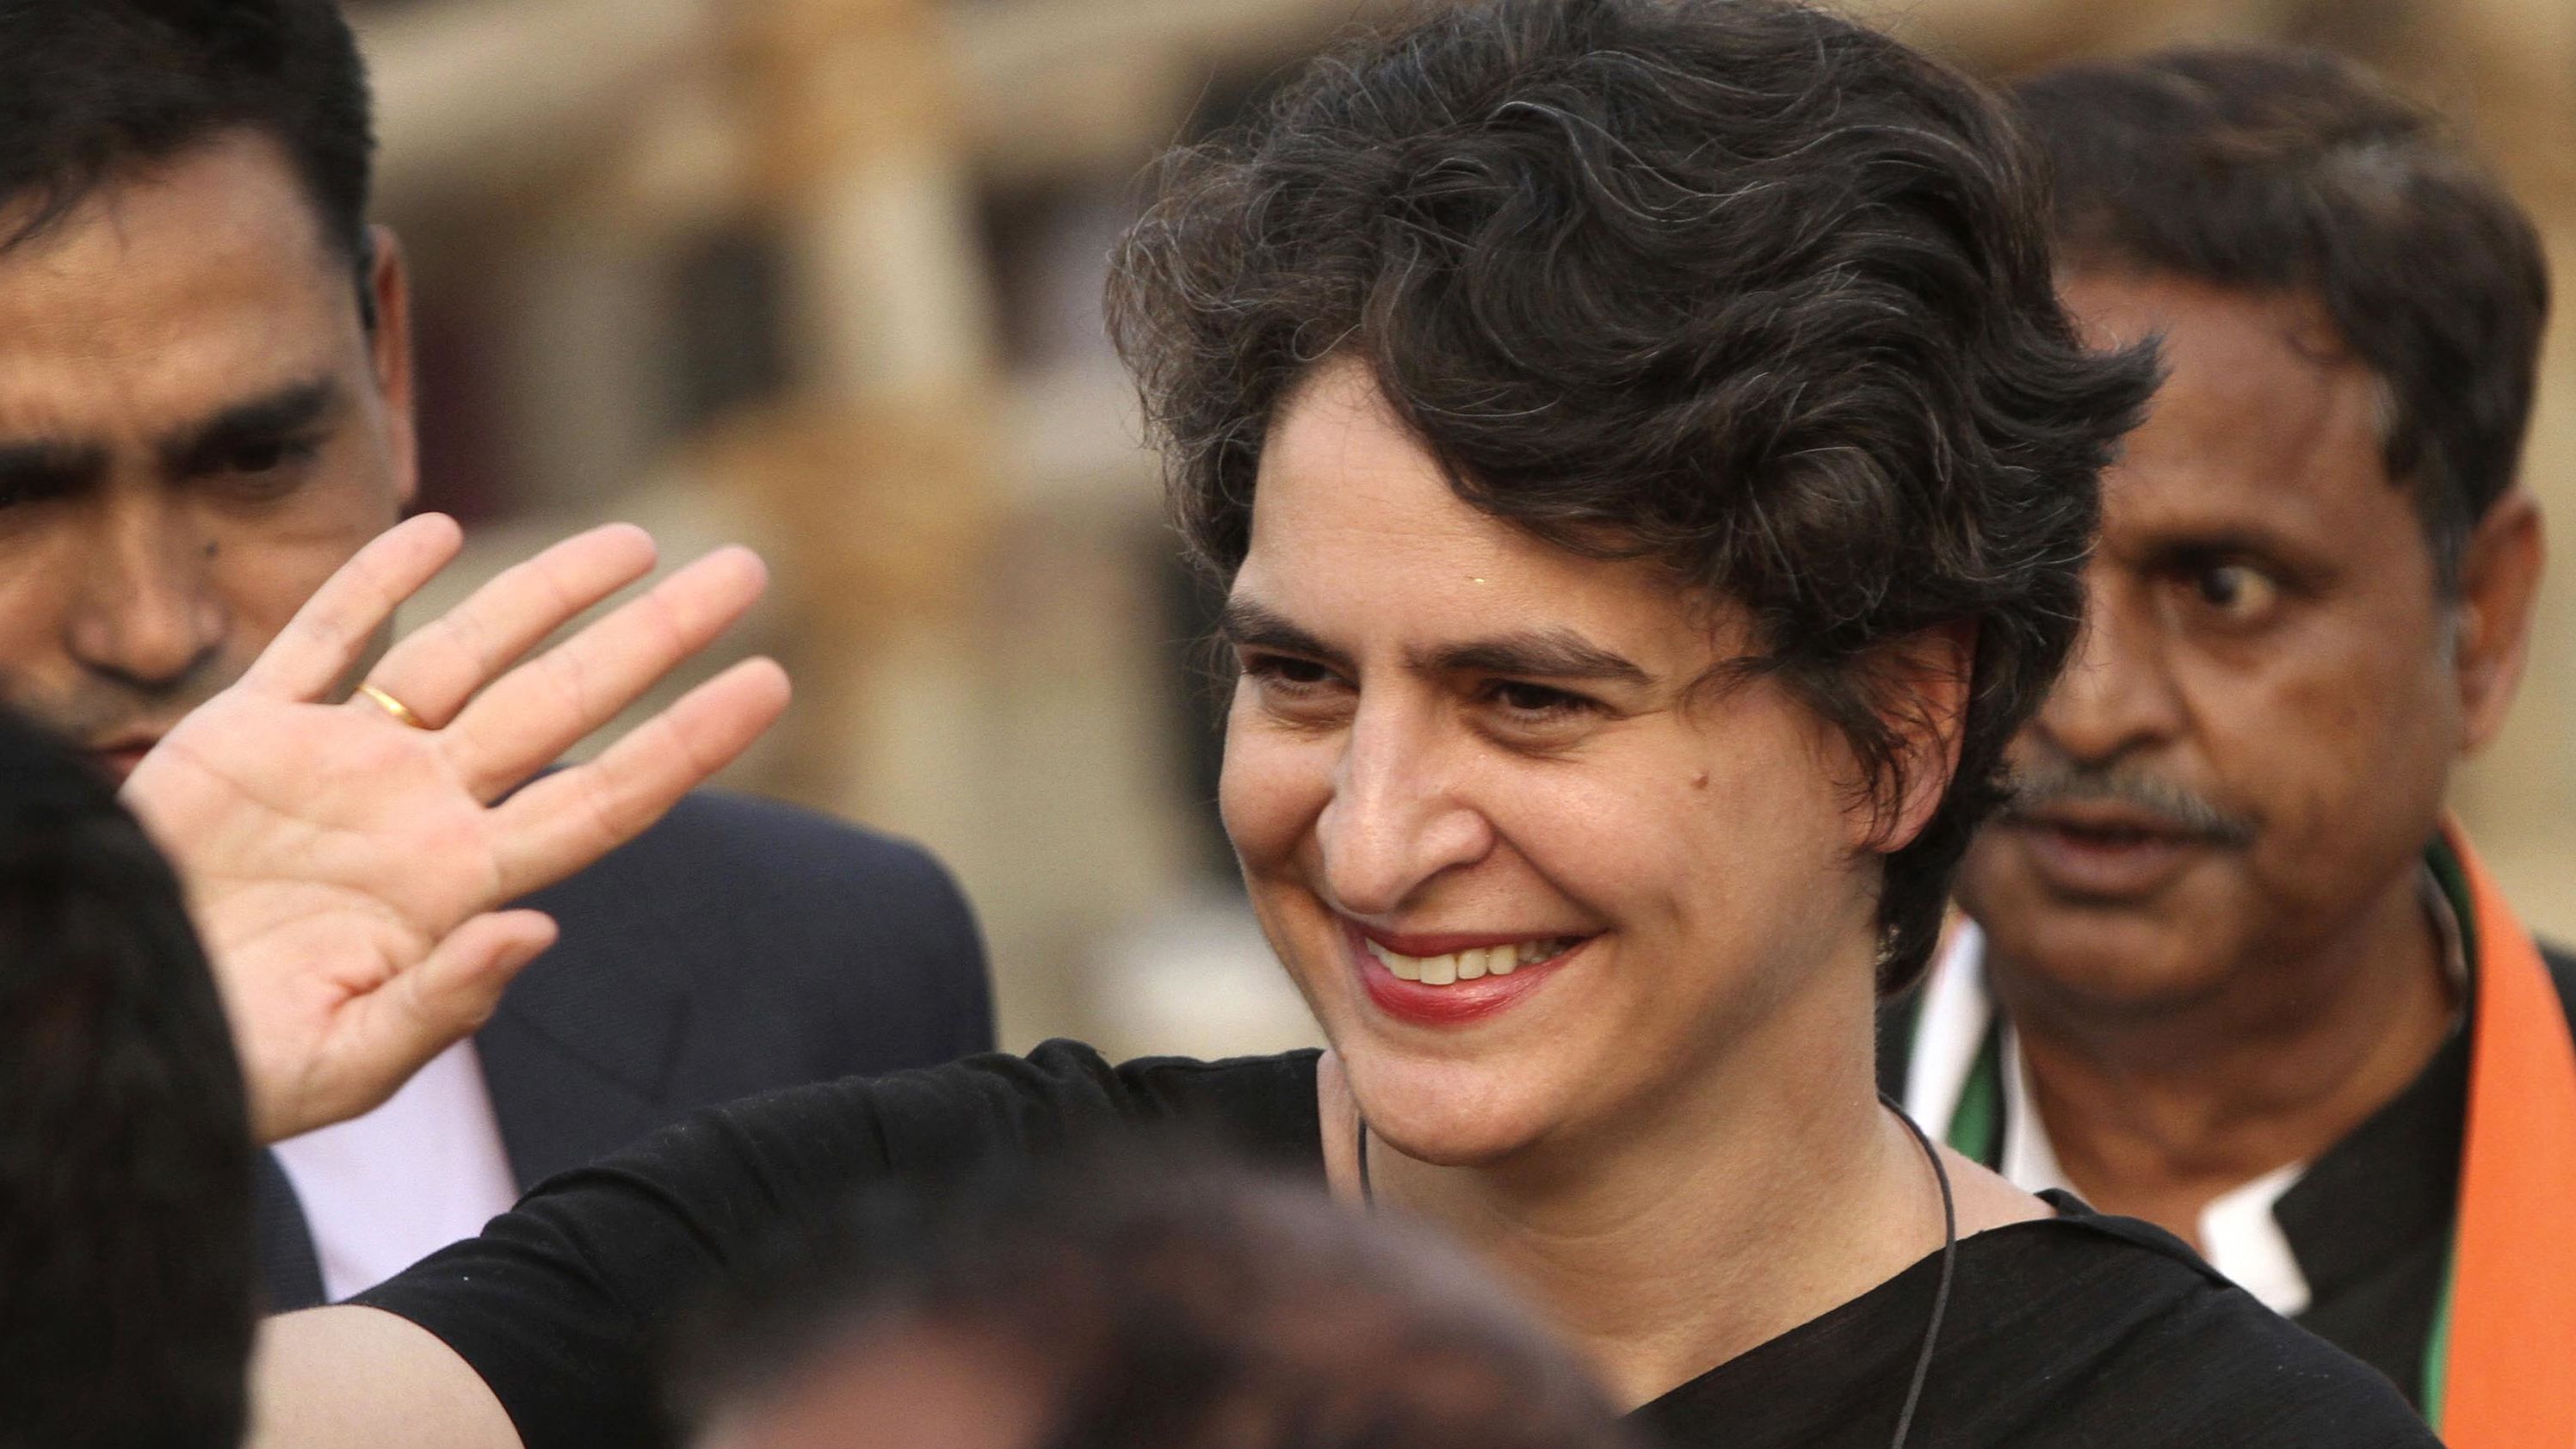 Priyanka Gandhi Vadra waves to Congress Party supporters during an election campaign rally in the northern Indian state of Uttar Pradesh on February 16, 2017.